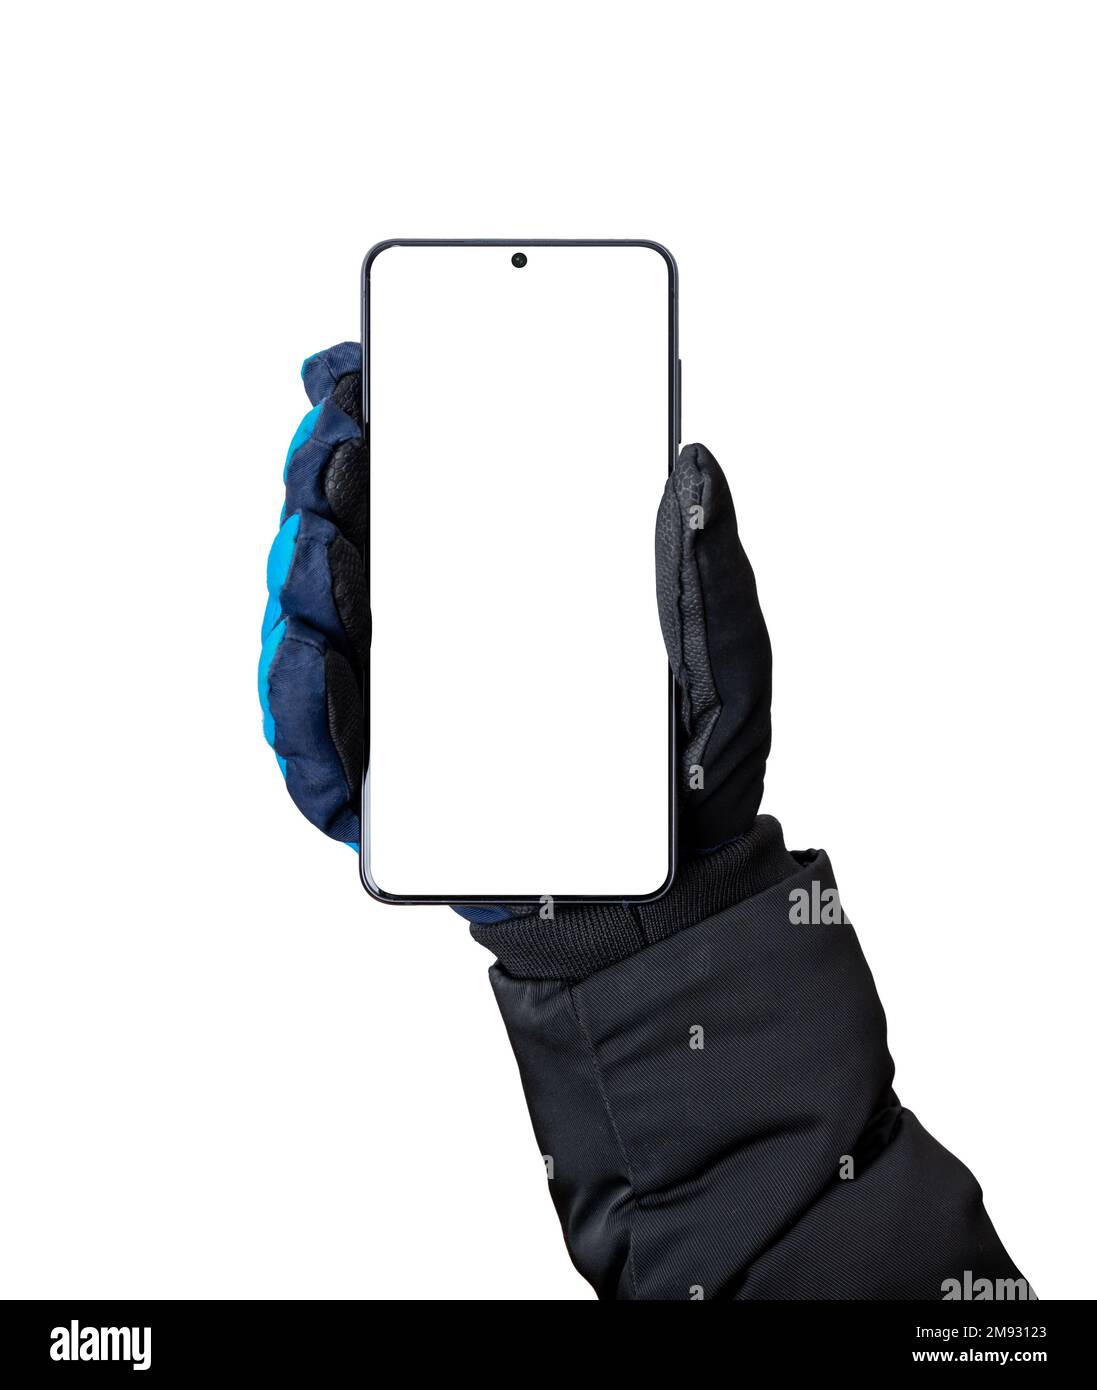 Isolated phone in hand with winter glove. Modern phone with thin edges and camera for app presentation mockup. Vertical position Stock Photo